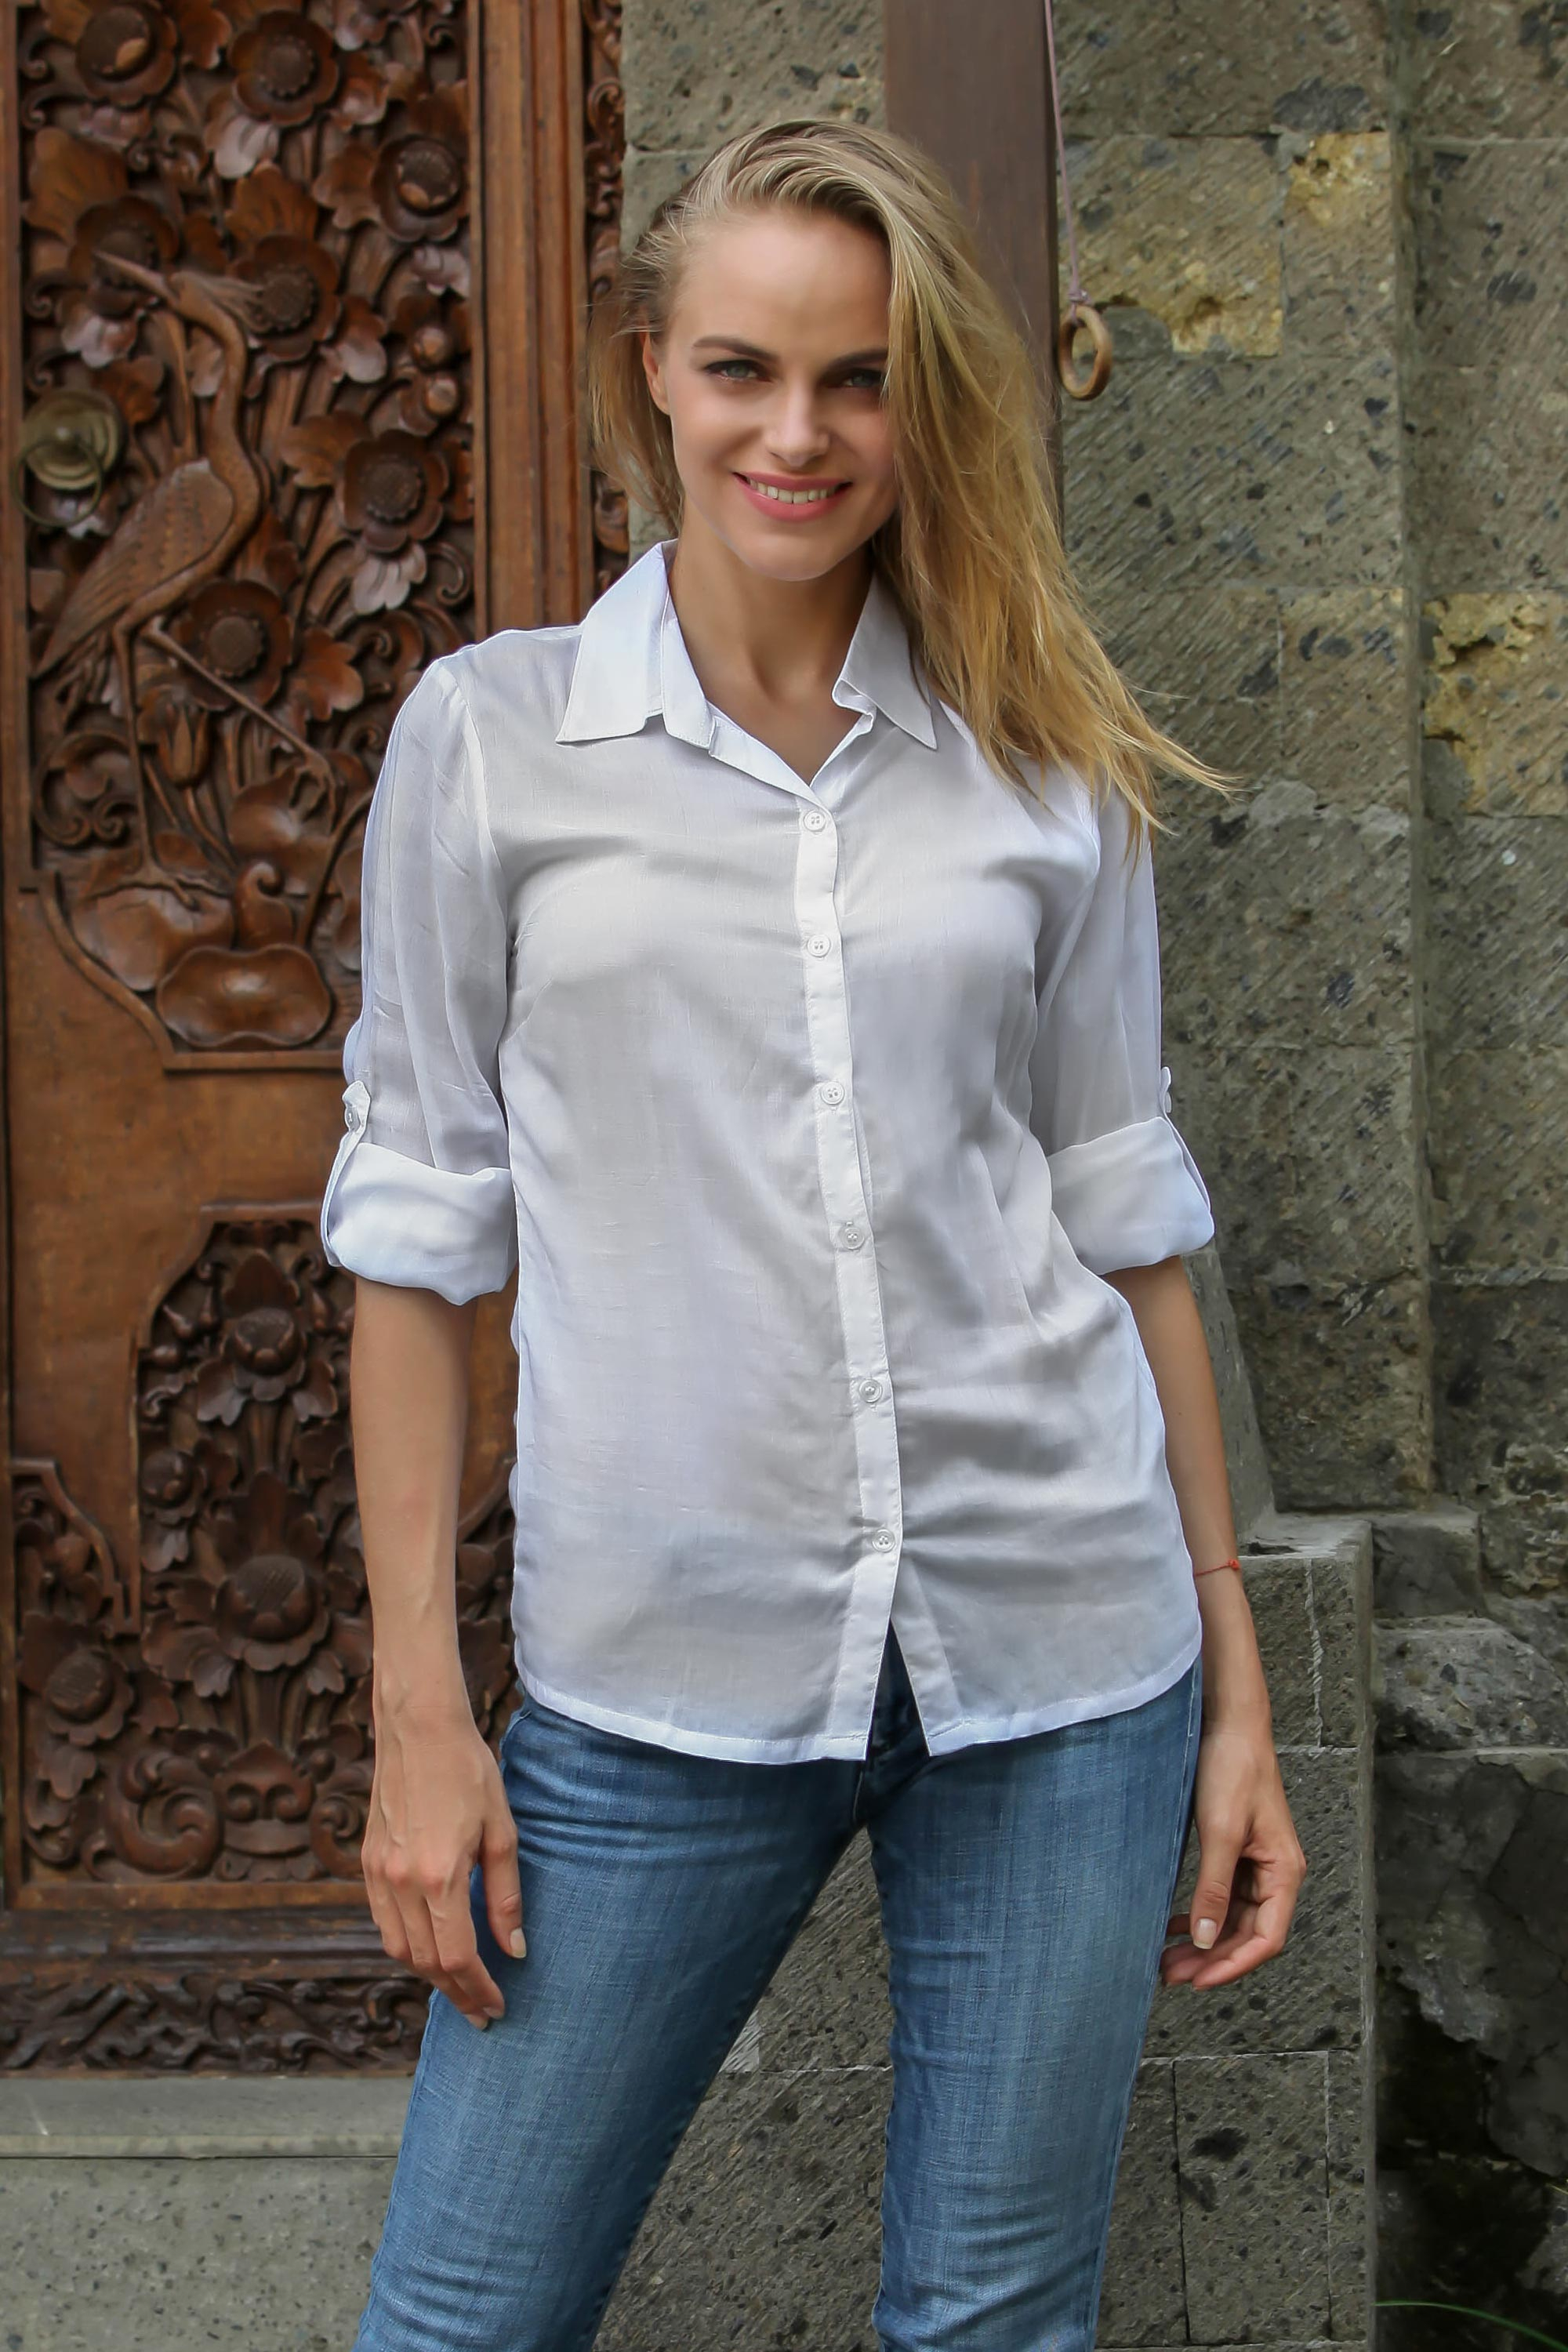 sheer white button up blouse